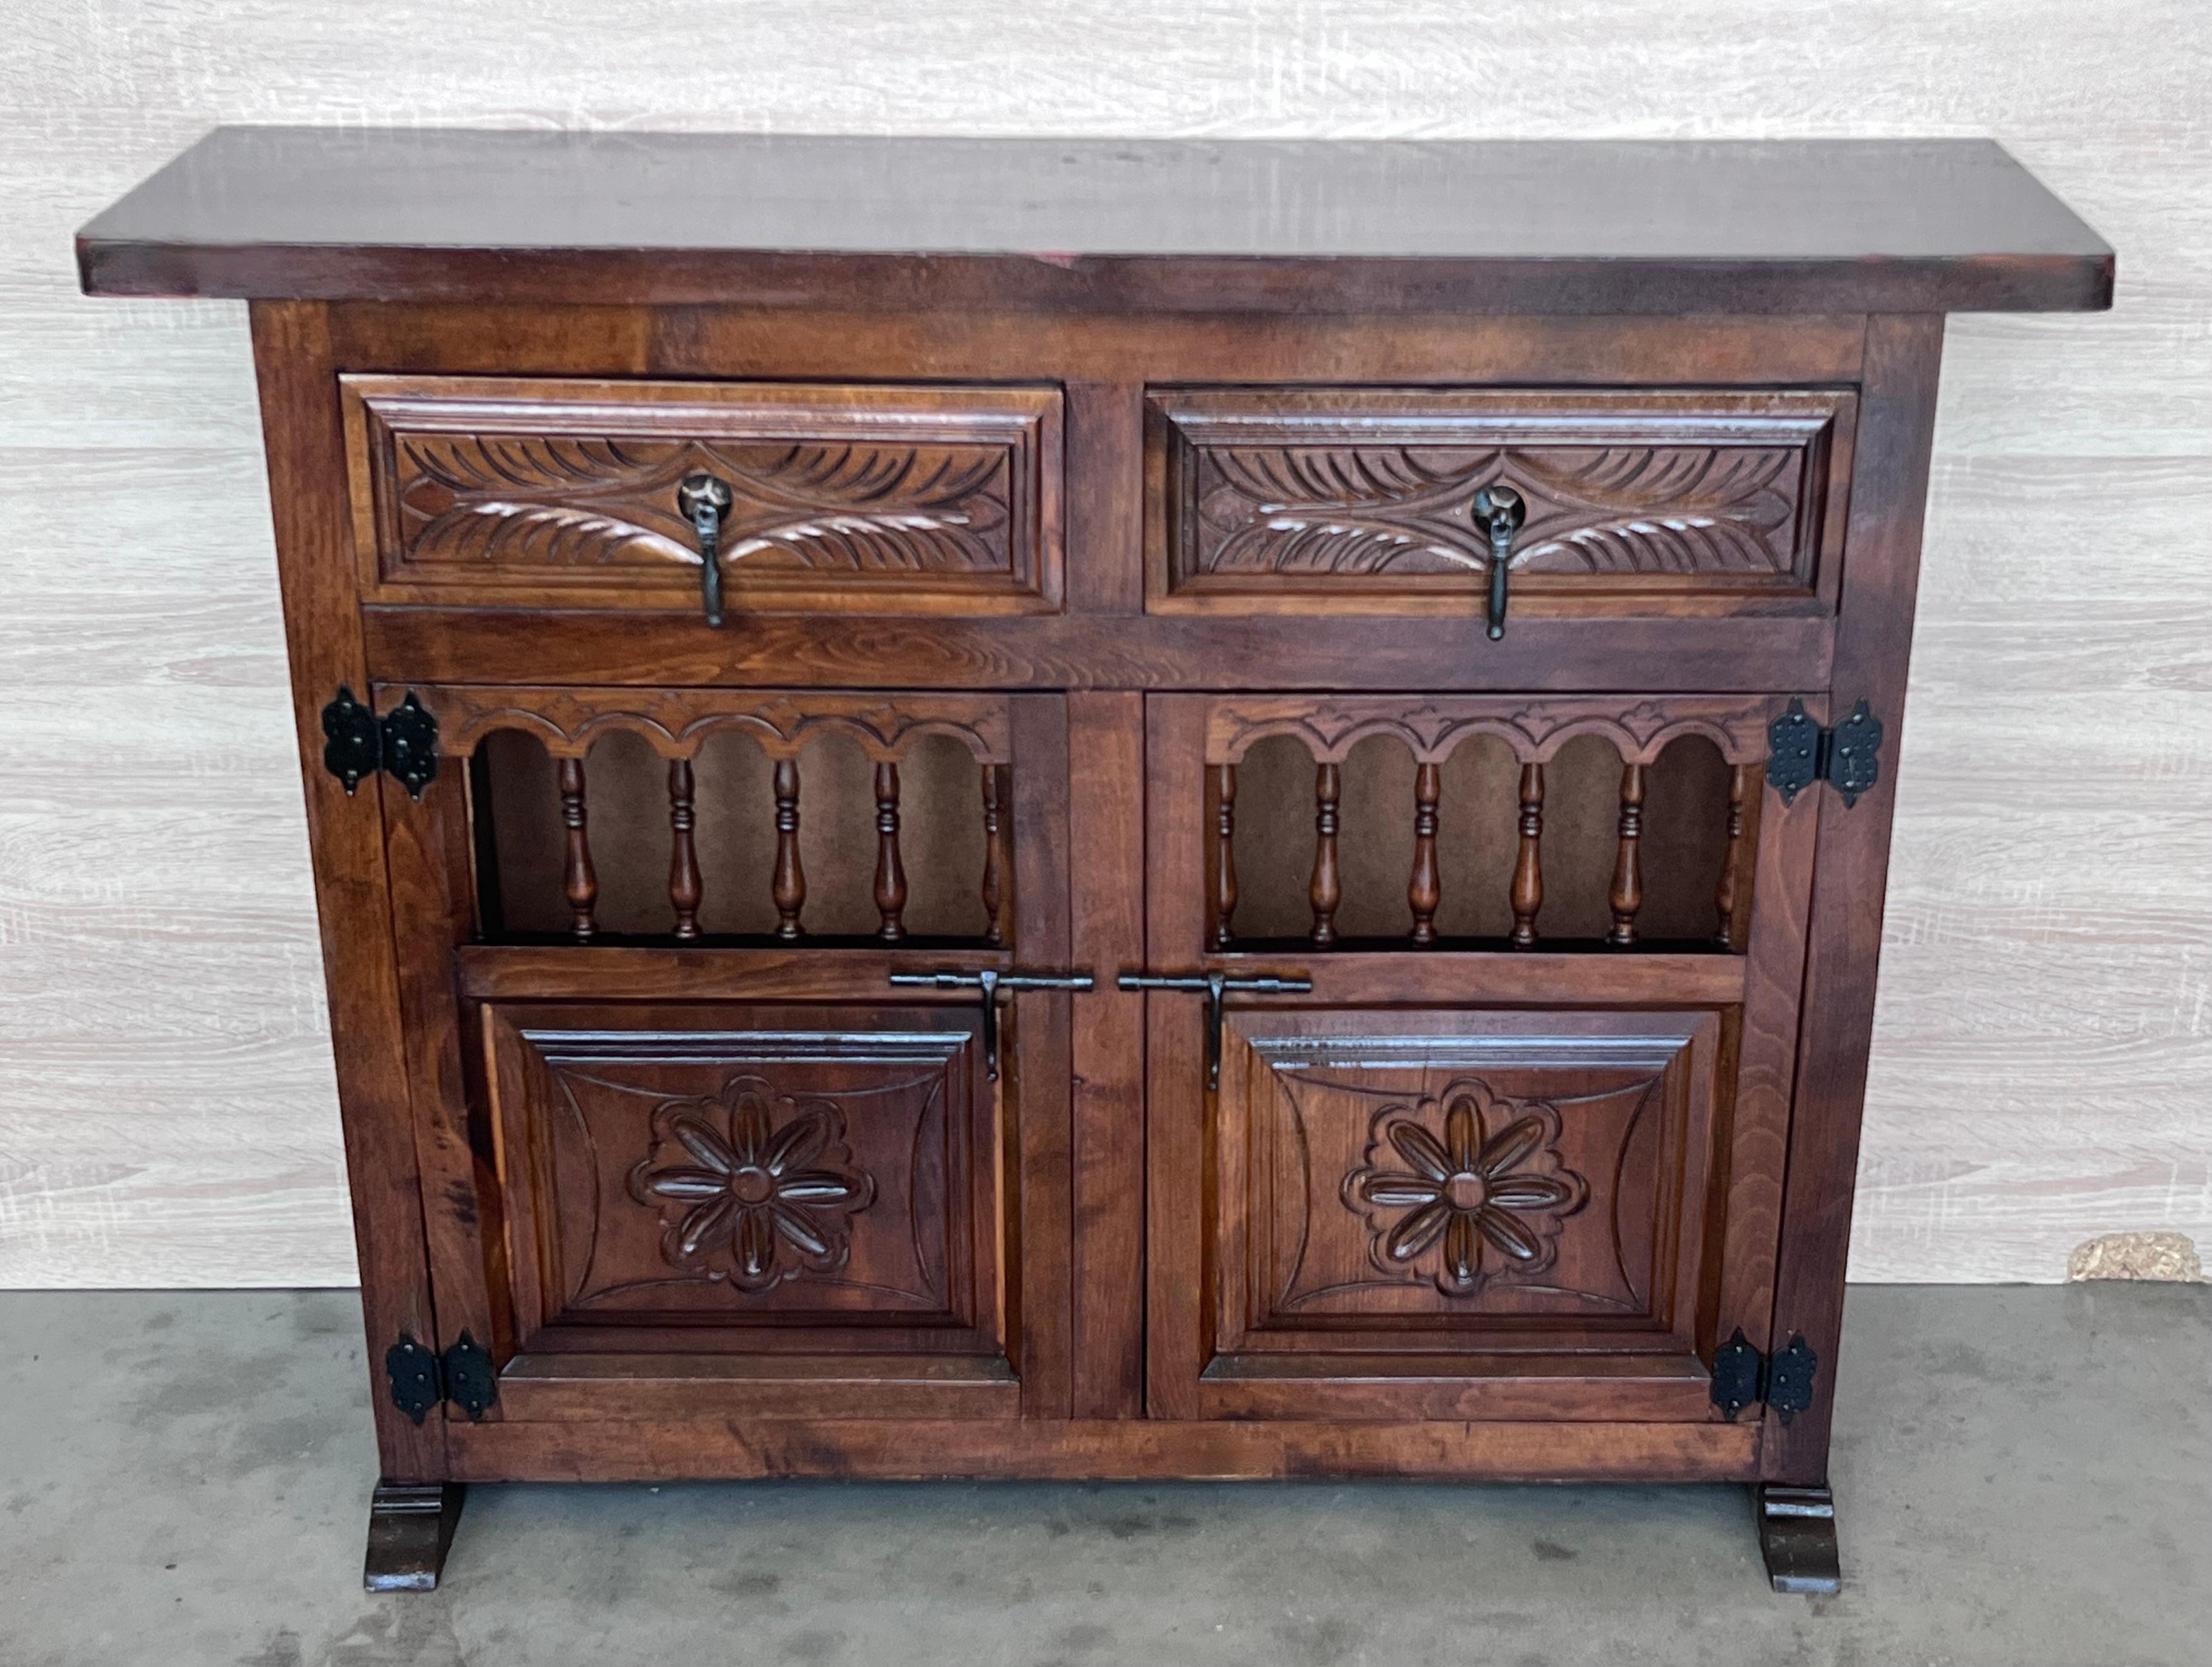 From Northern Spain, constructed of solid oak, the rectangular top with molded edge atop a conforming case housing two carved drawers over two carved doors, the doors paneled with solid walnut, raised on a plinth base.
Very heavy and original